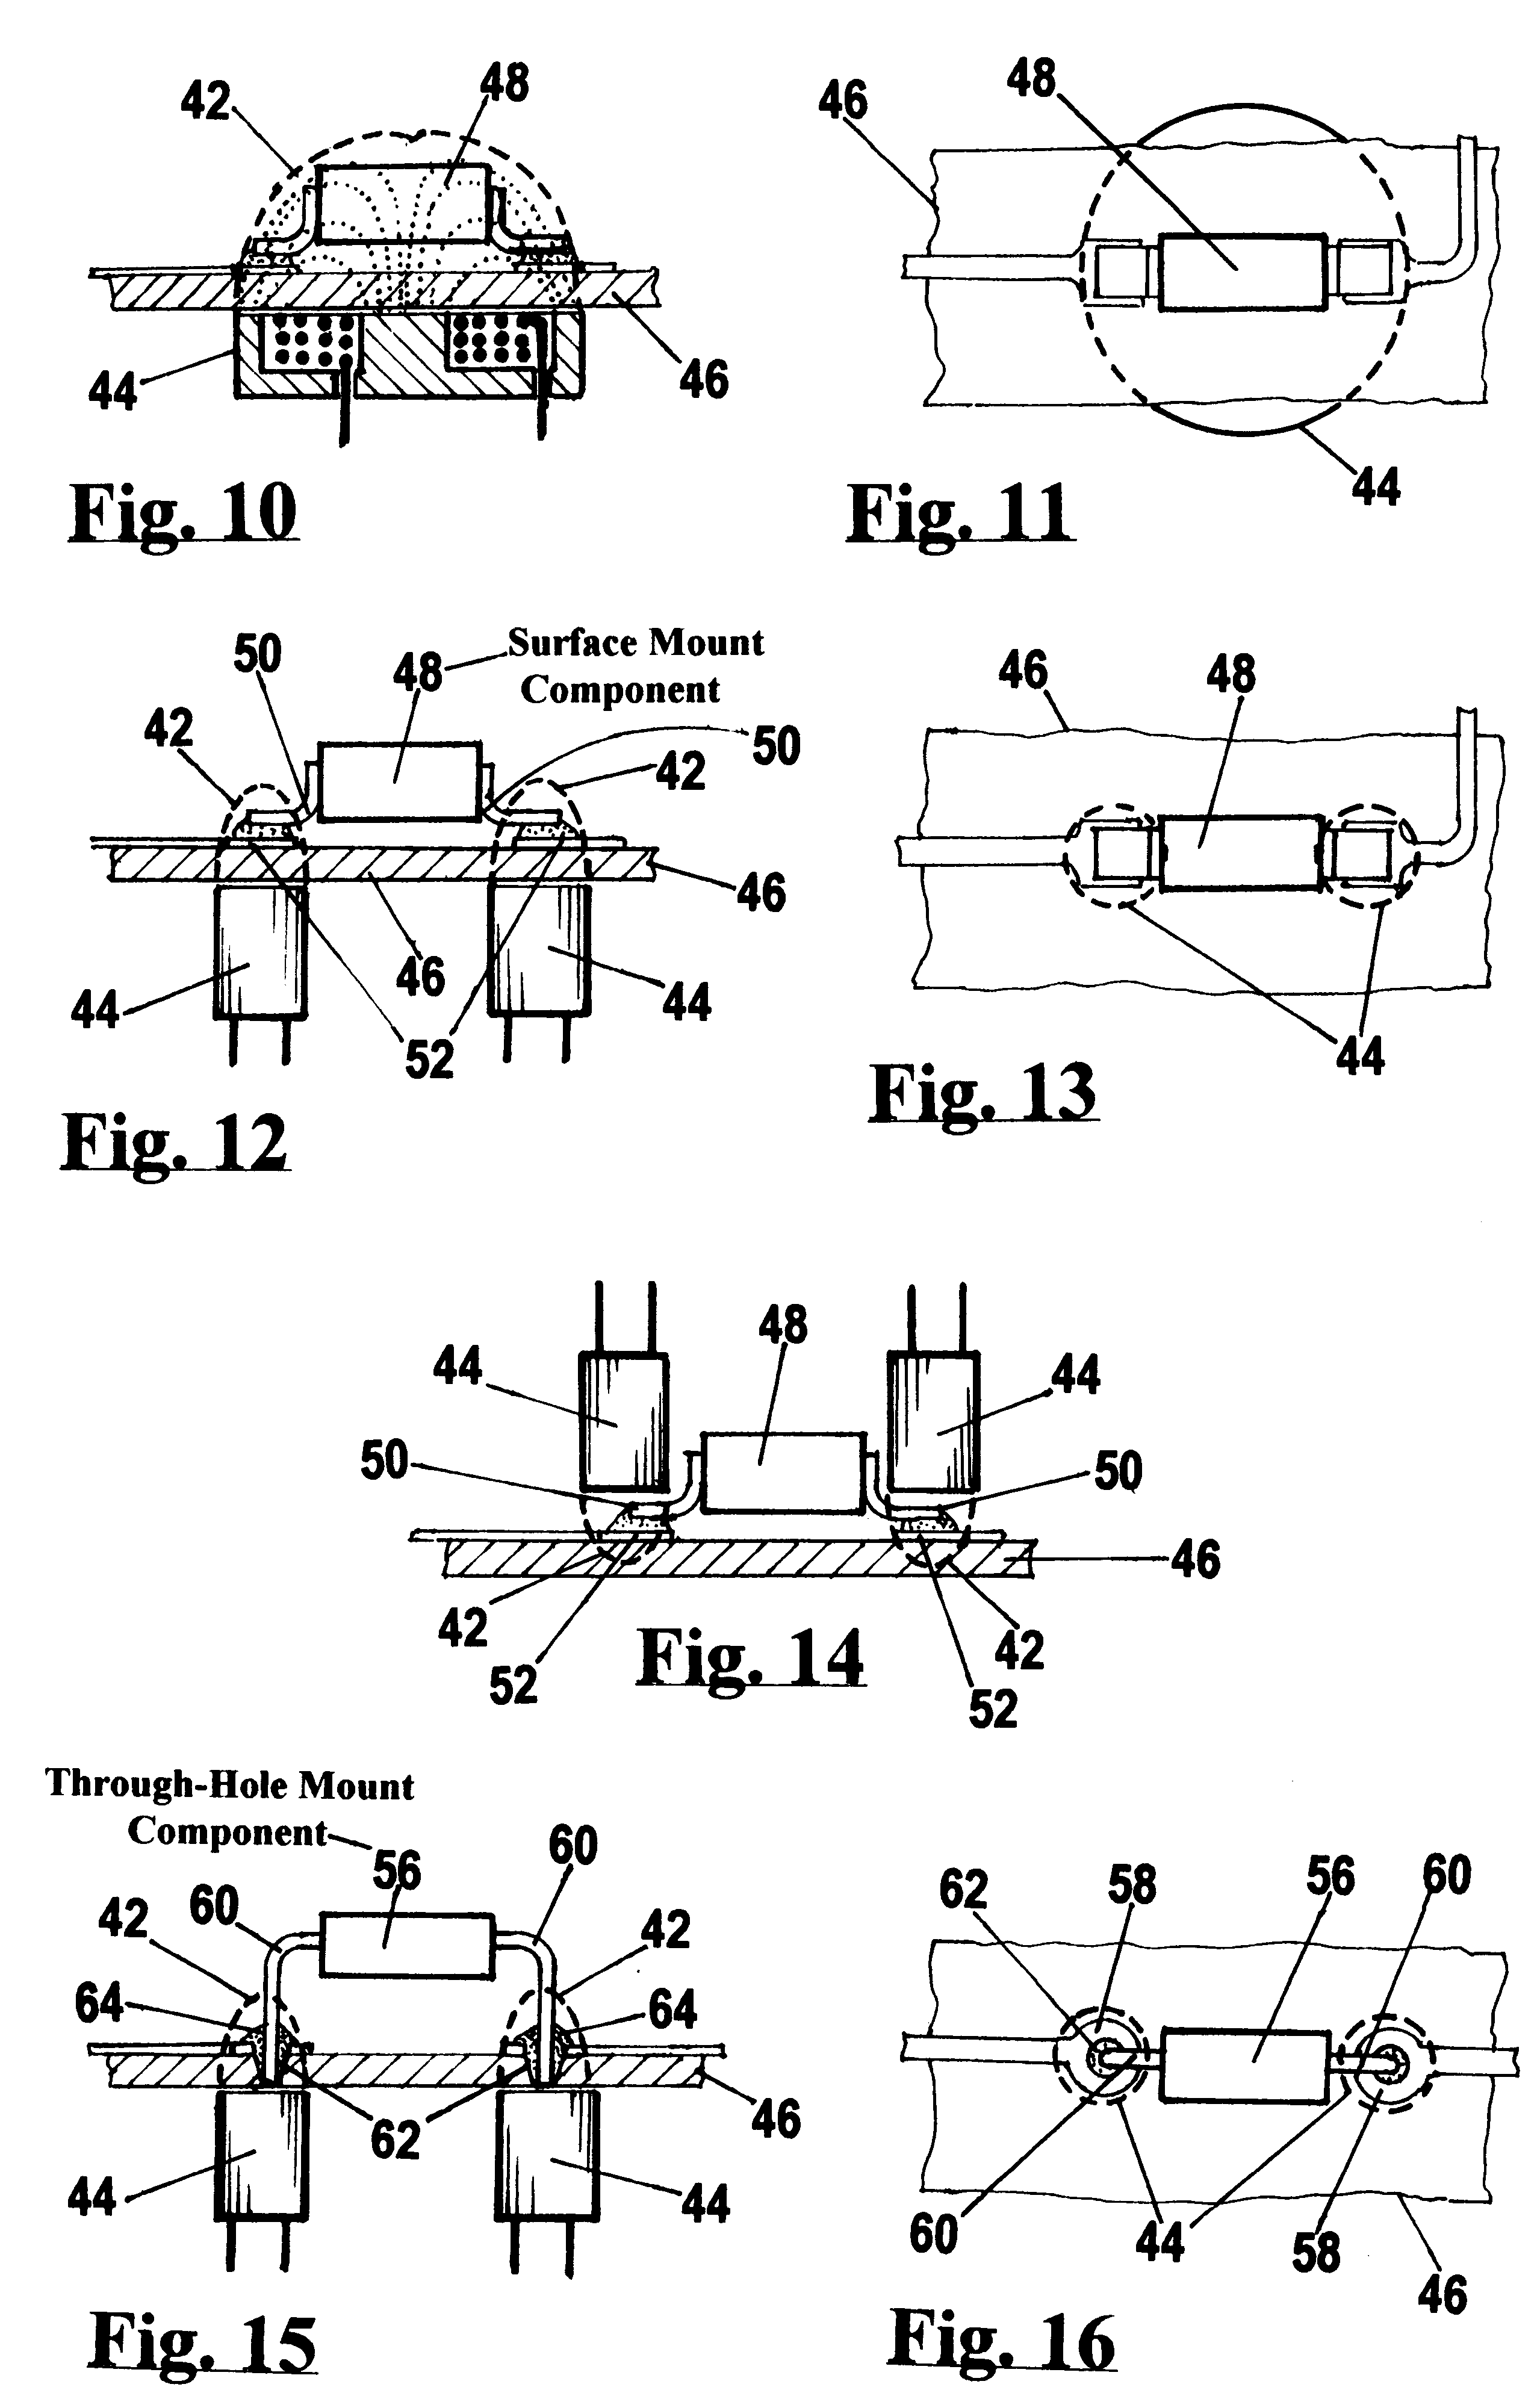 Matrix-inductor soldering apparatus and device